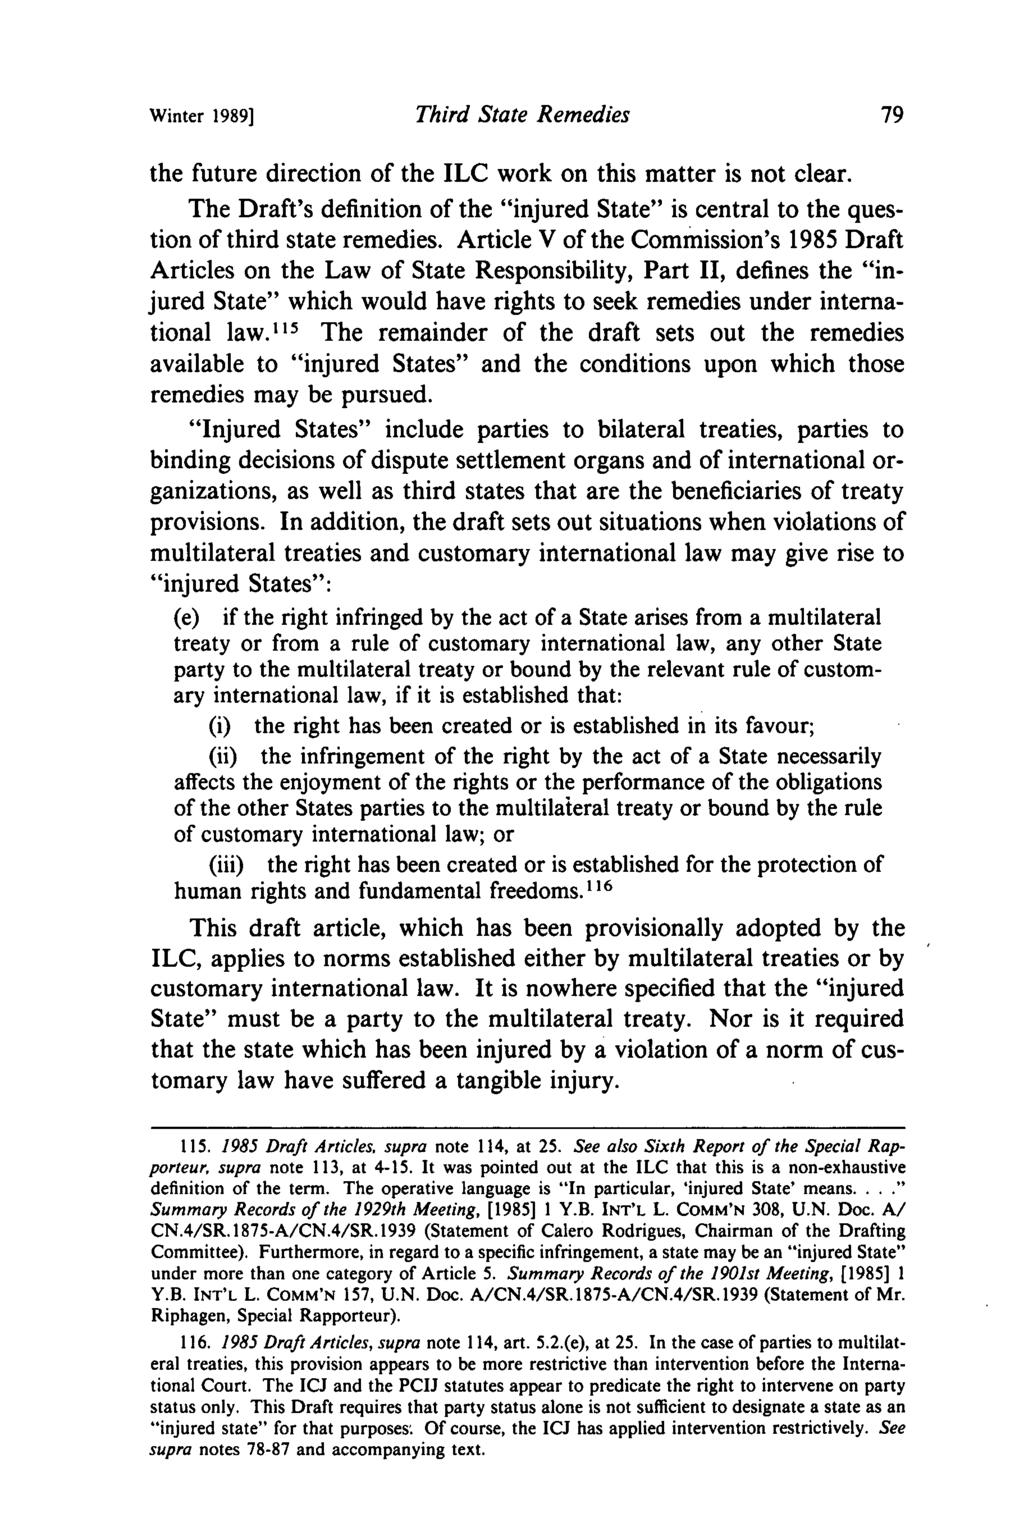 Winter 1989] Third State Remedies the future direction of the ILC work on this matter is not clear. The Draft's definition of the "injured State" is central to the question of third state remedies.